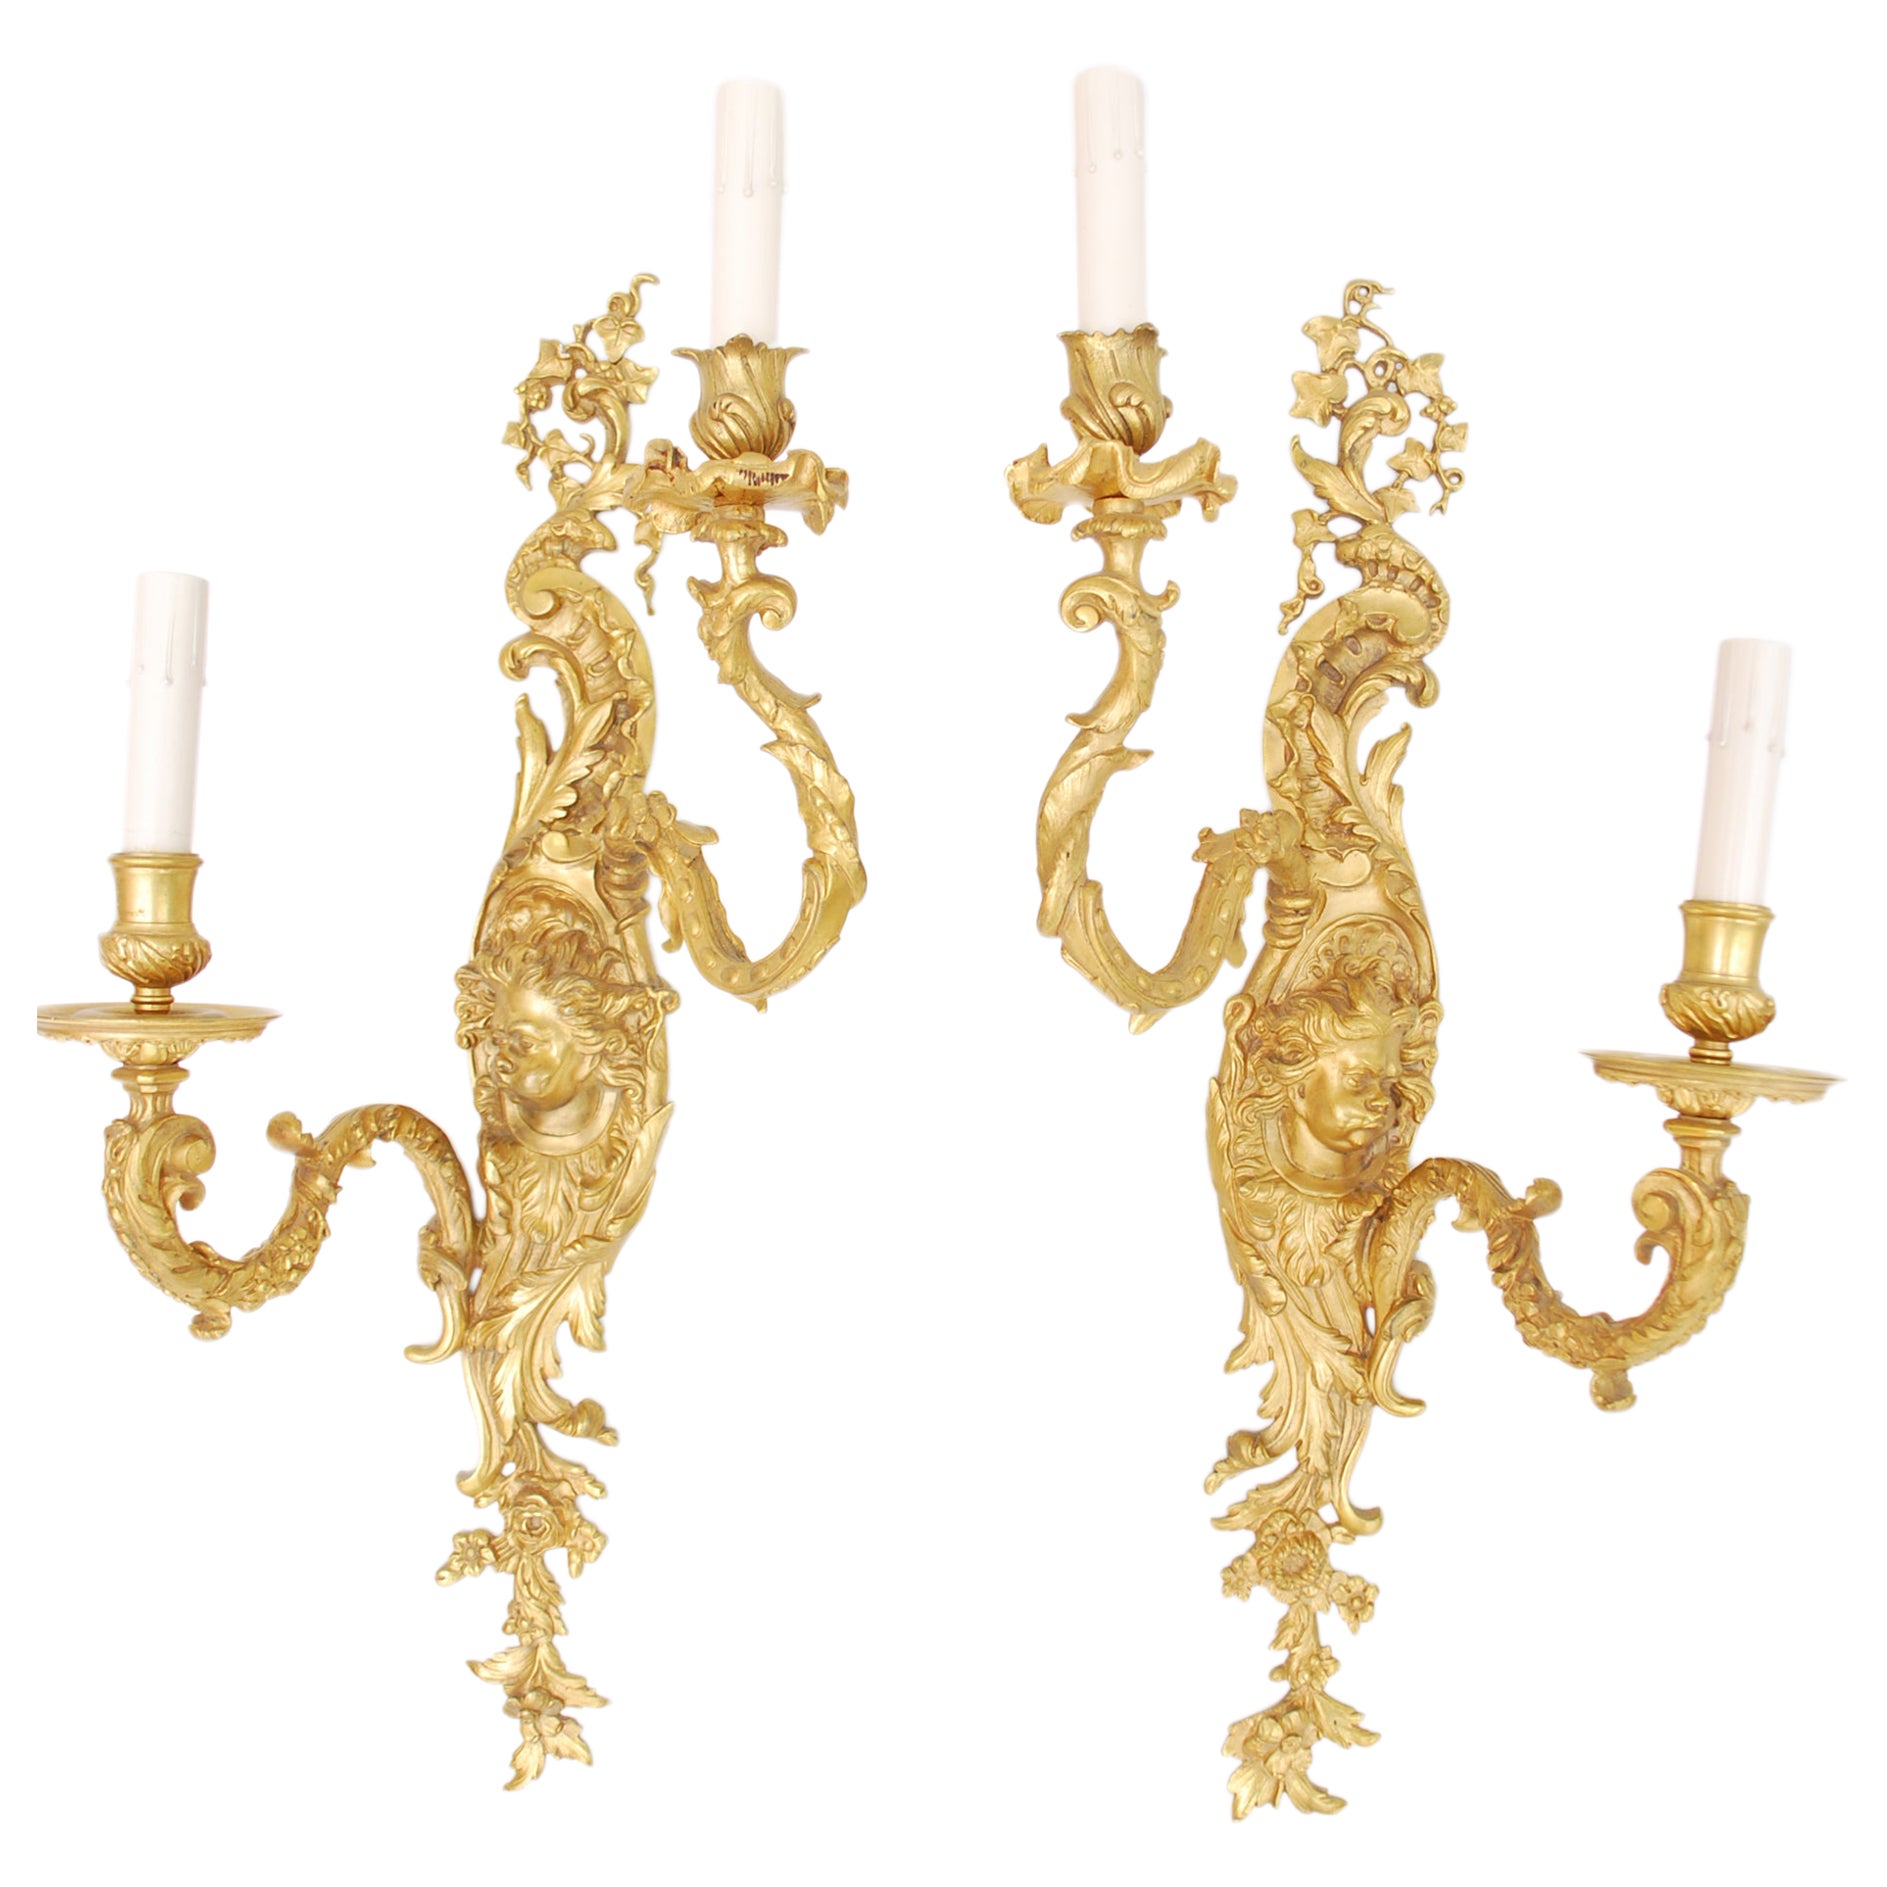 Beautiful French Bronze Sconces with Cherubs For Sale